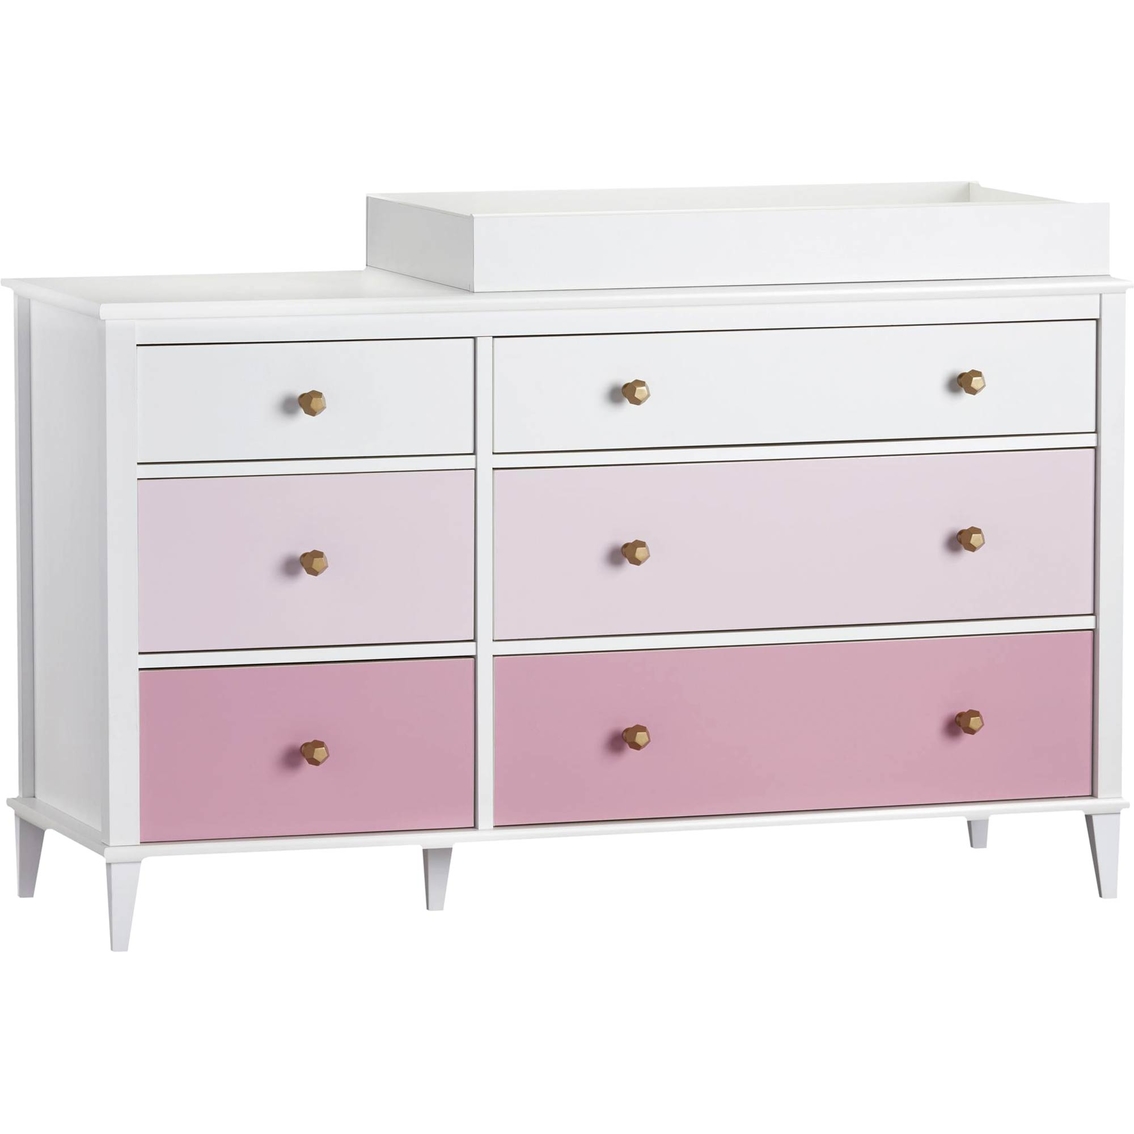 Little Seeds Monarch Hill Poppy 6 Drawer Changing Table - Image 2 of 3